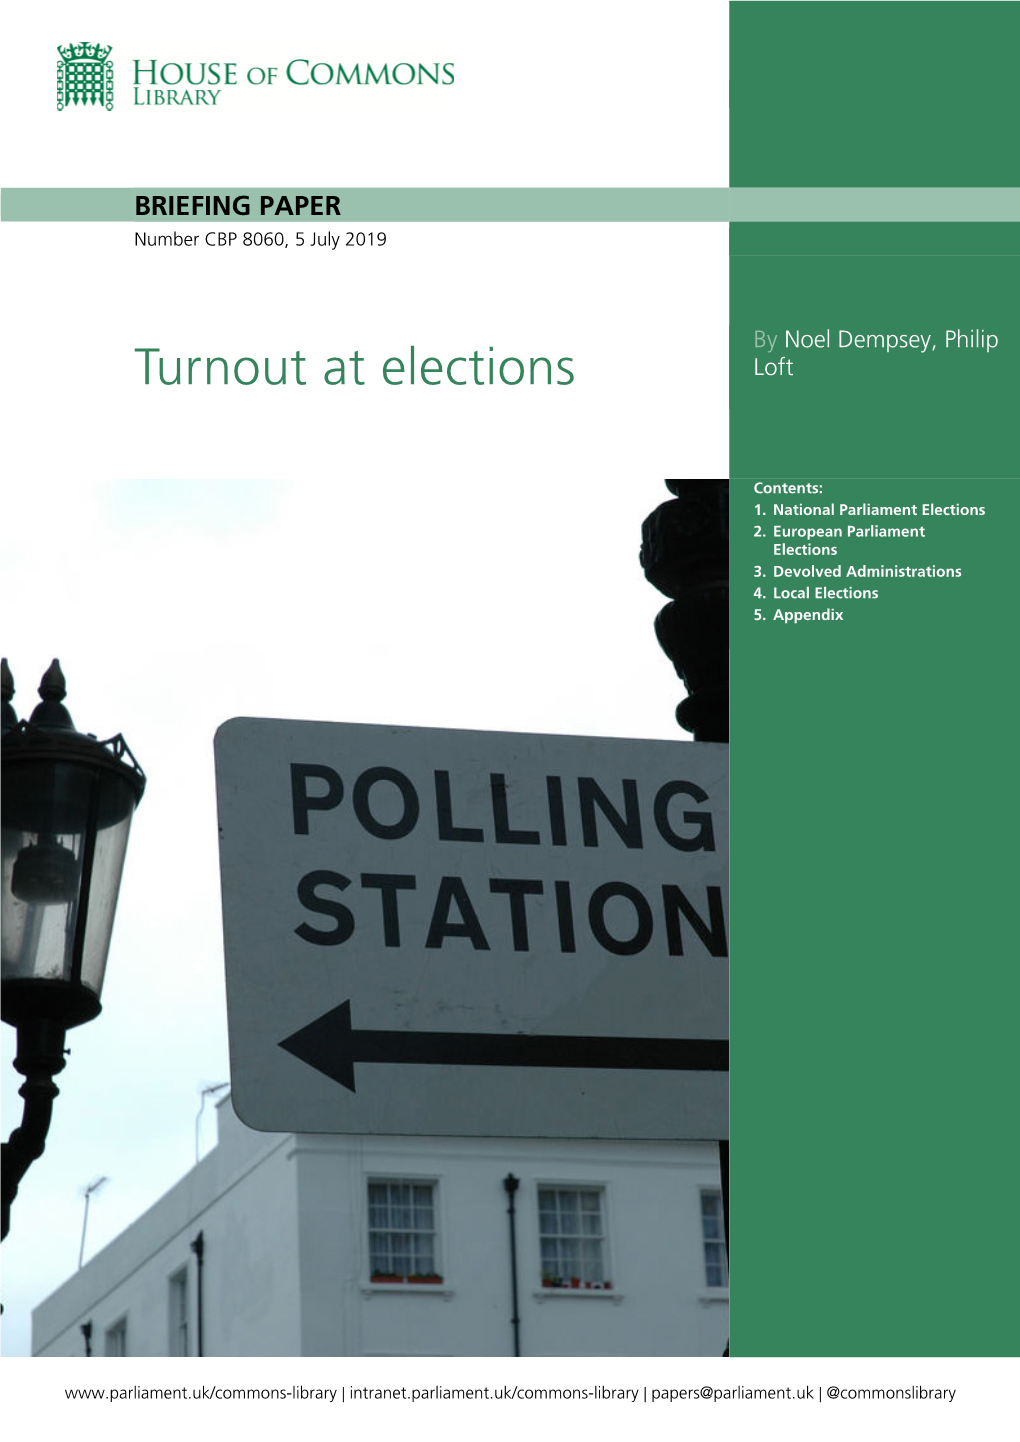 Turnout at Elections